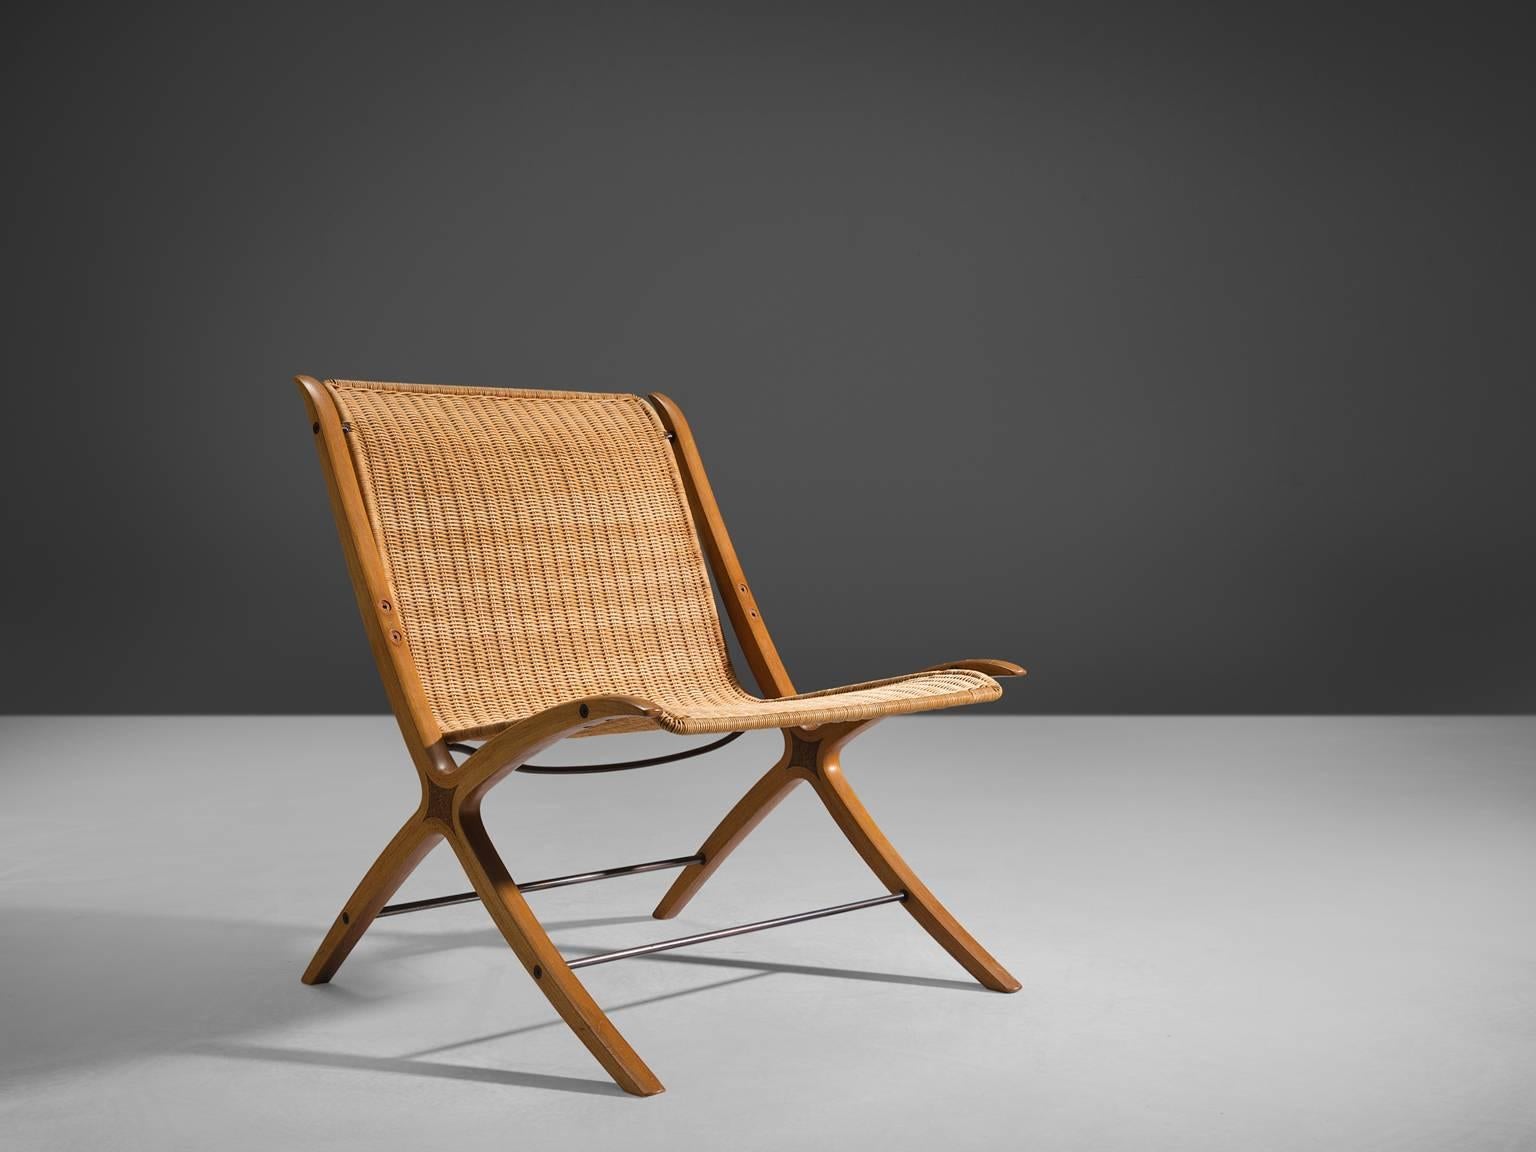 Peter Hvidt &Orla Mølgaard Nielsen for Fritz Hansen, X-chair 'model 6103', in cane, maple and mahogany, Denmark, 1958.

This chair is for obvious reasons nicknamed the X-chair. The detailing of this X-design runs all the way from the front legs to